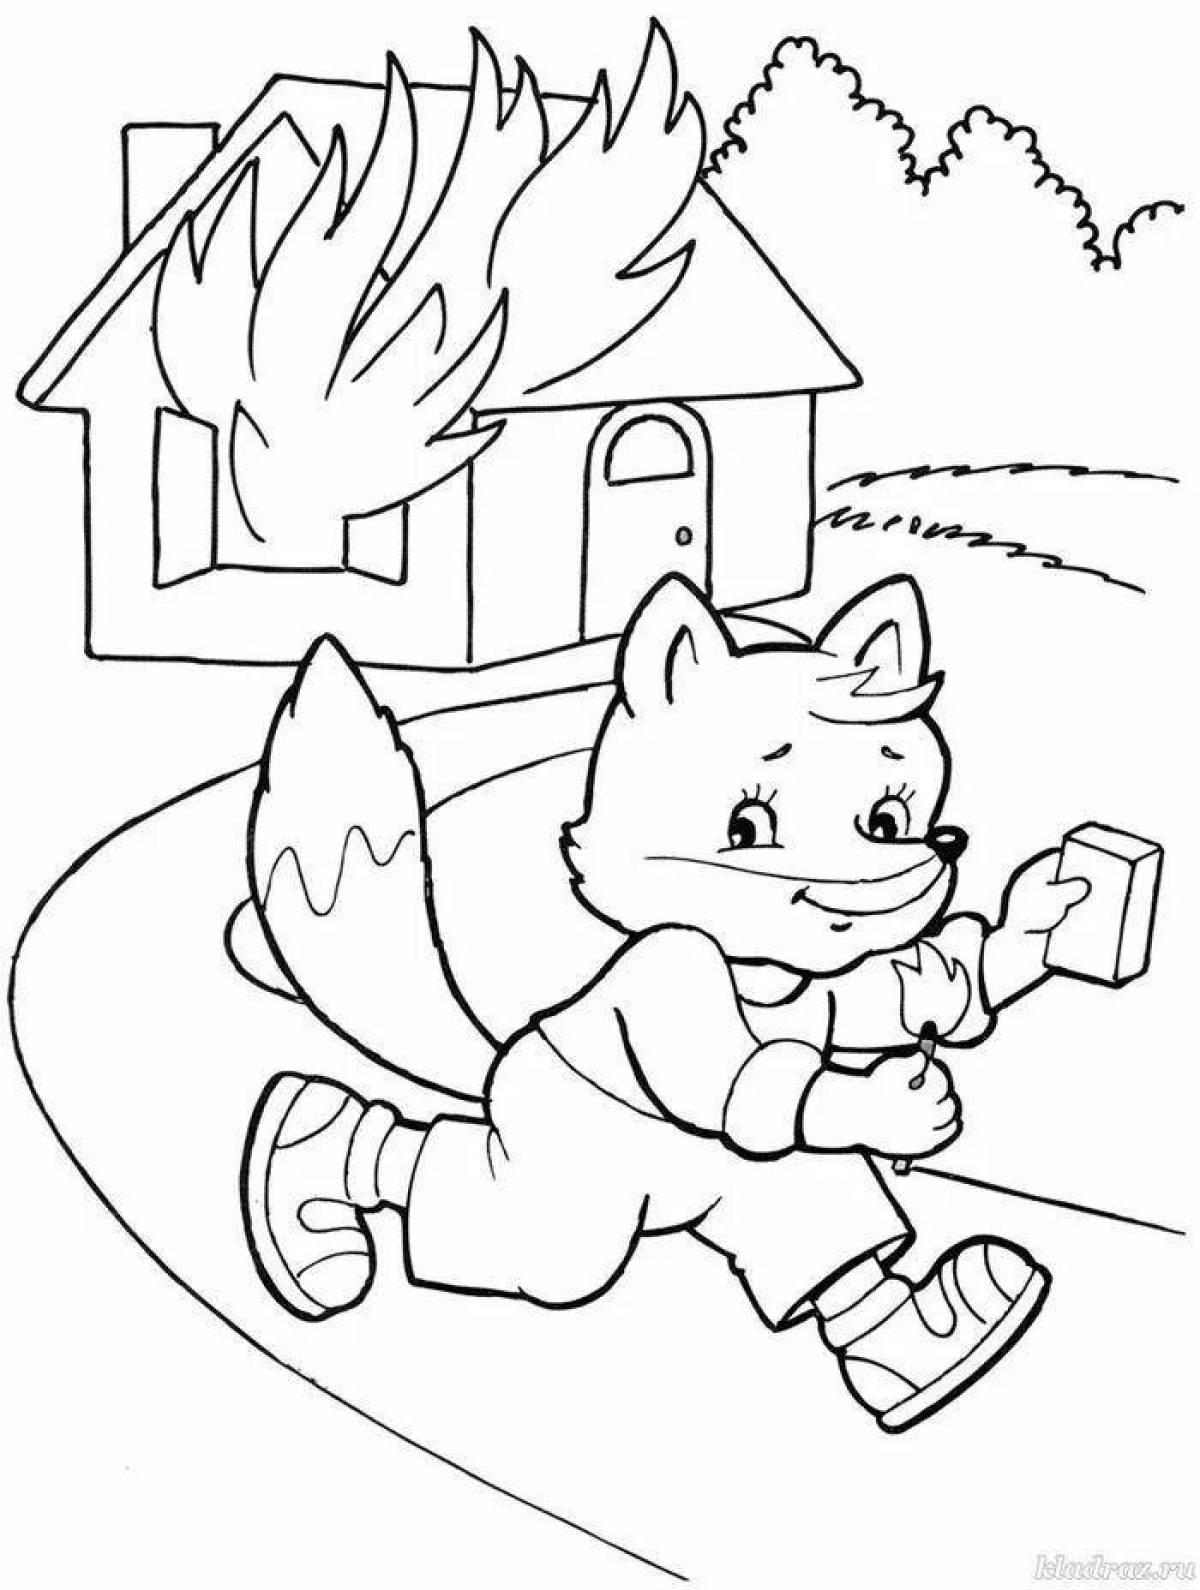 Colorful fire safety coloring pages for preschoolers